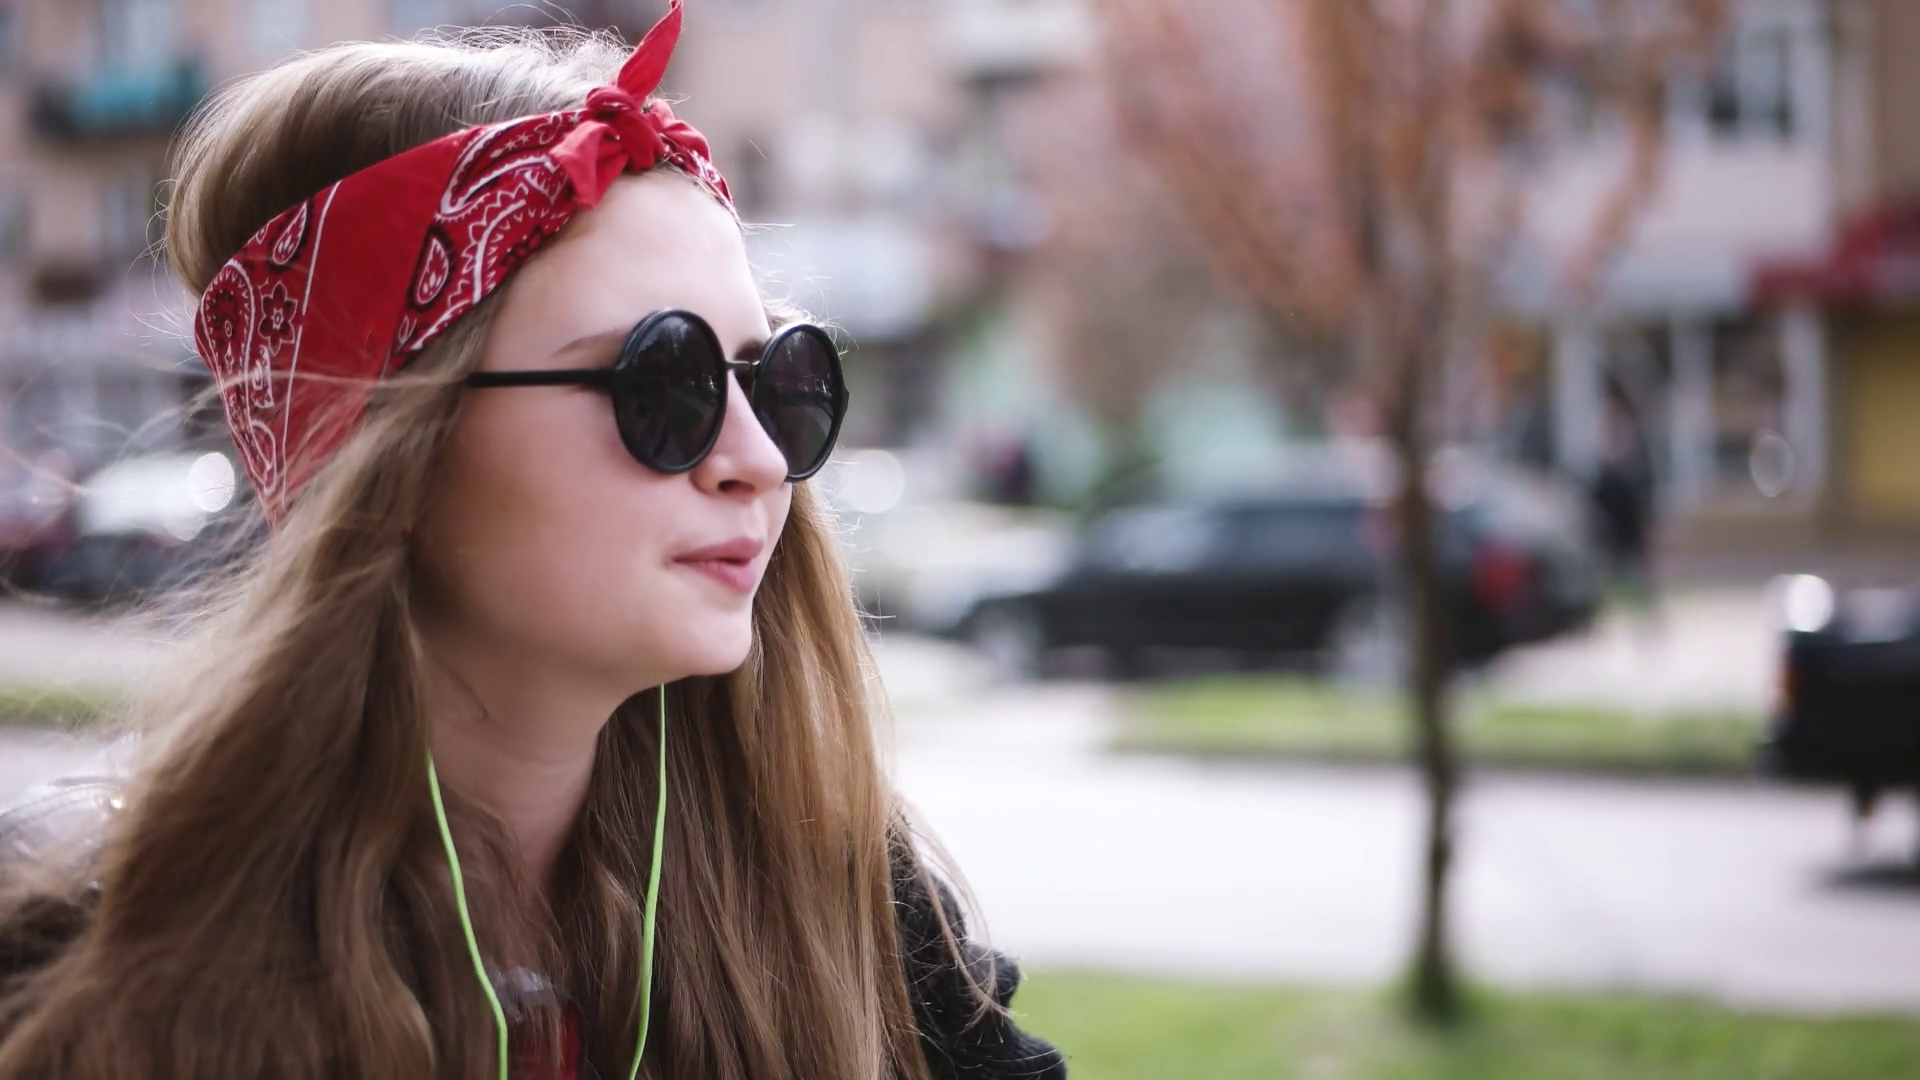 videoblocks-teenage-casual-girl-in-sunglasses-riding-her-bike-through-the-city-and-listen-to-the-music-with-headphones_bahax2v0g_thumbnail-full01